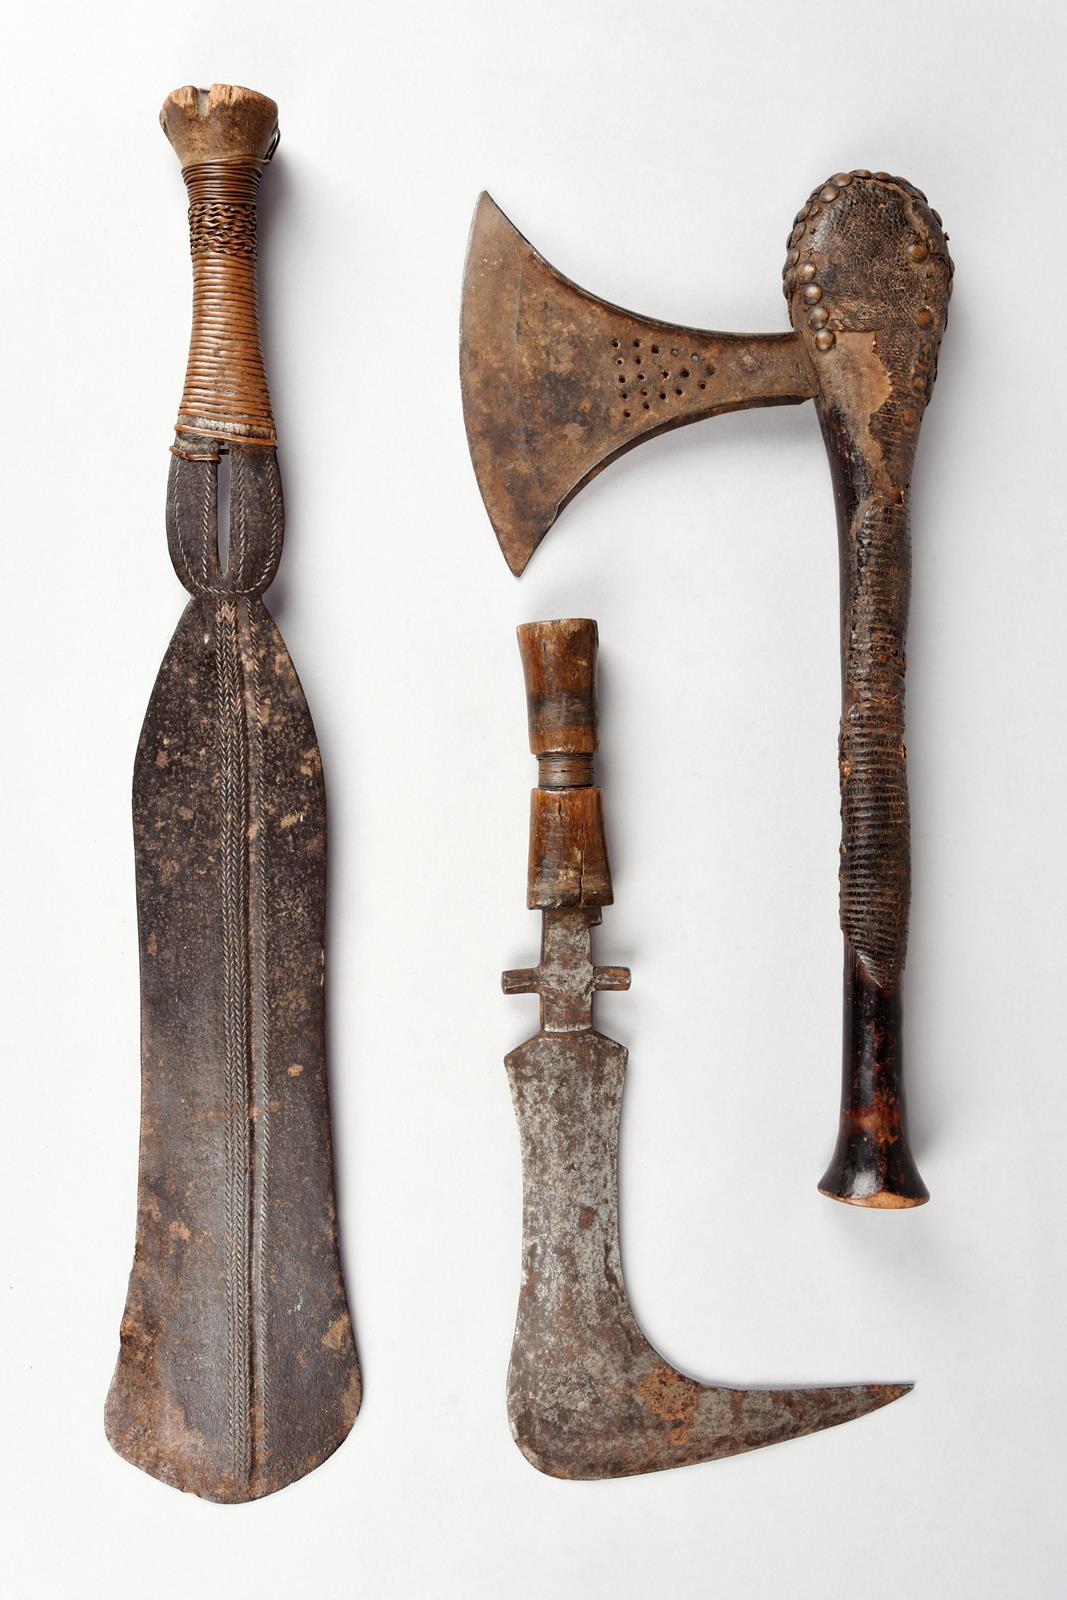 A Songye axe Democratic Republic of the Congo with the remains of reptile skin and with brass studs,